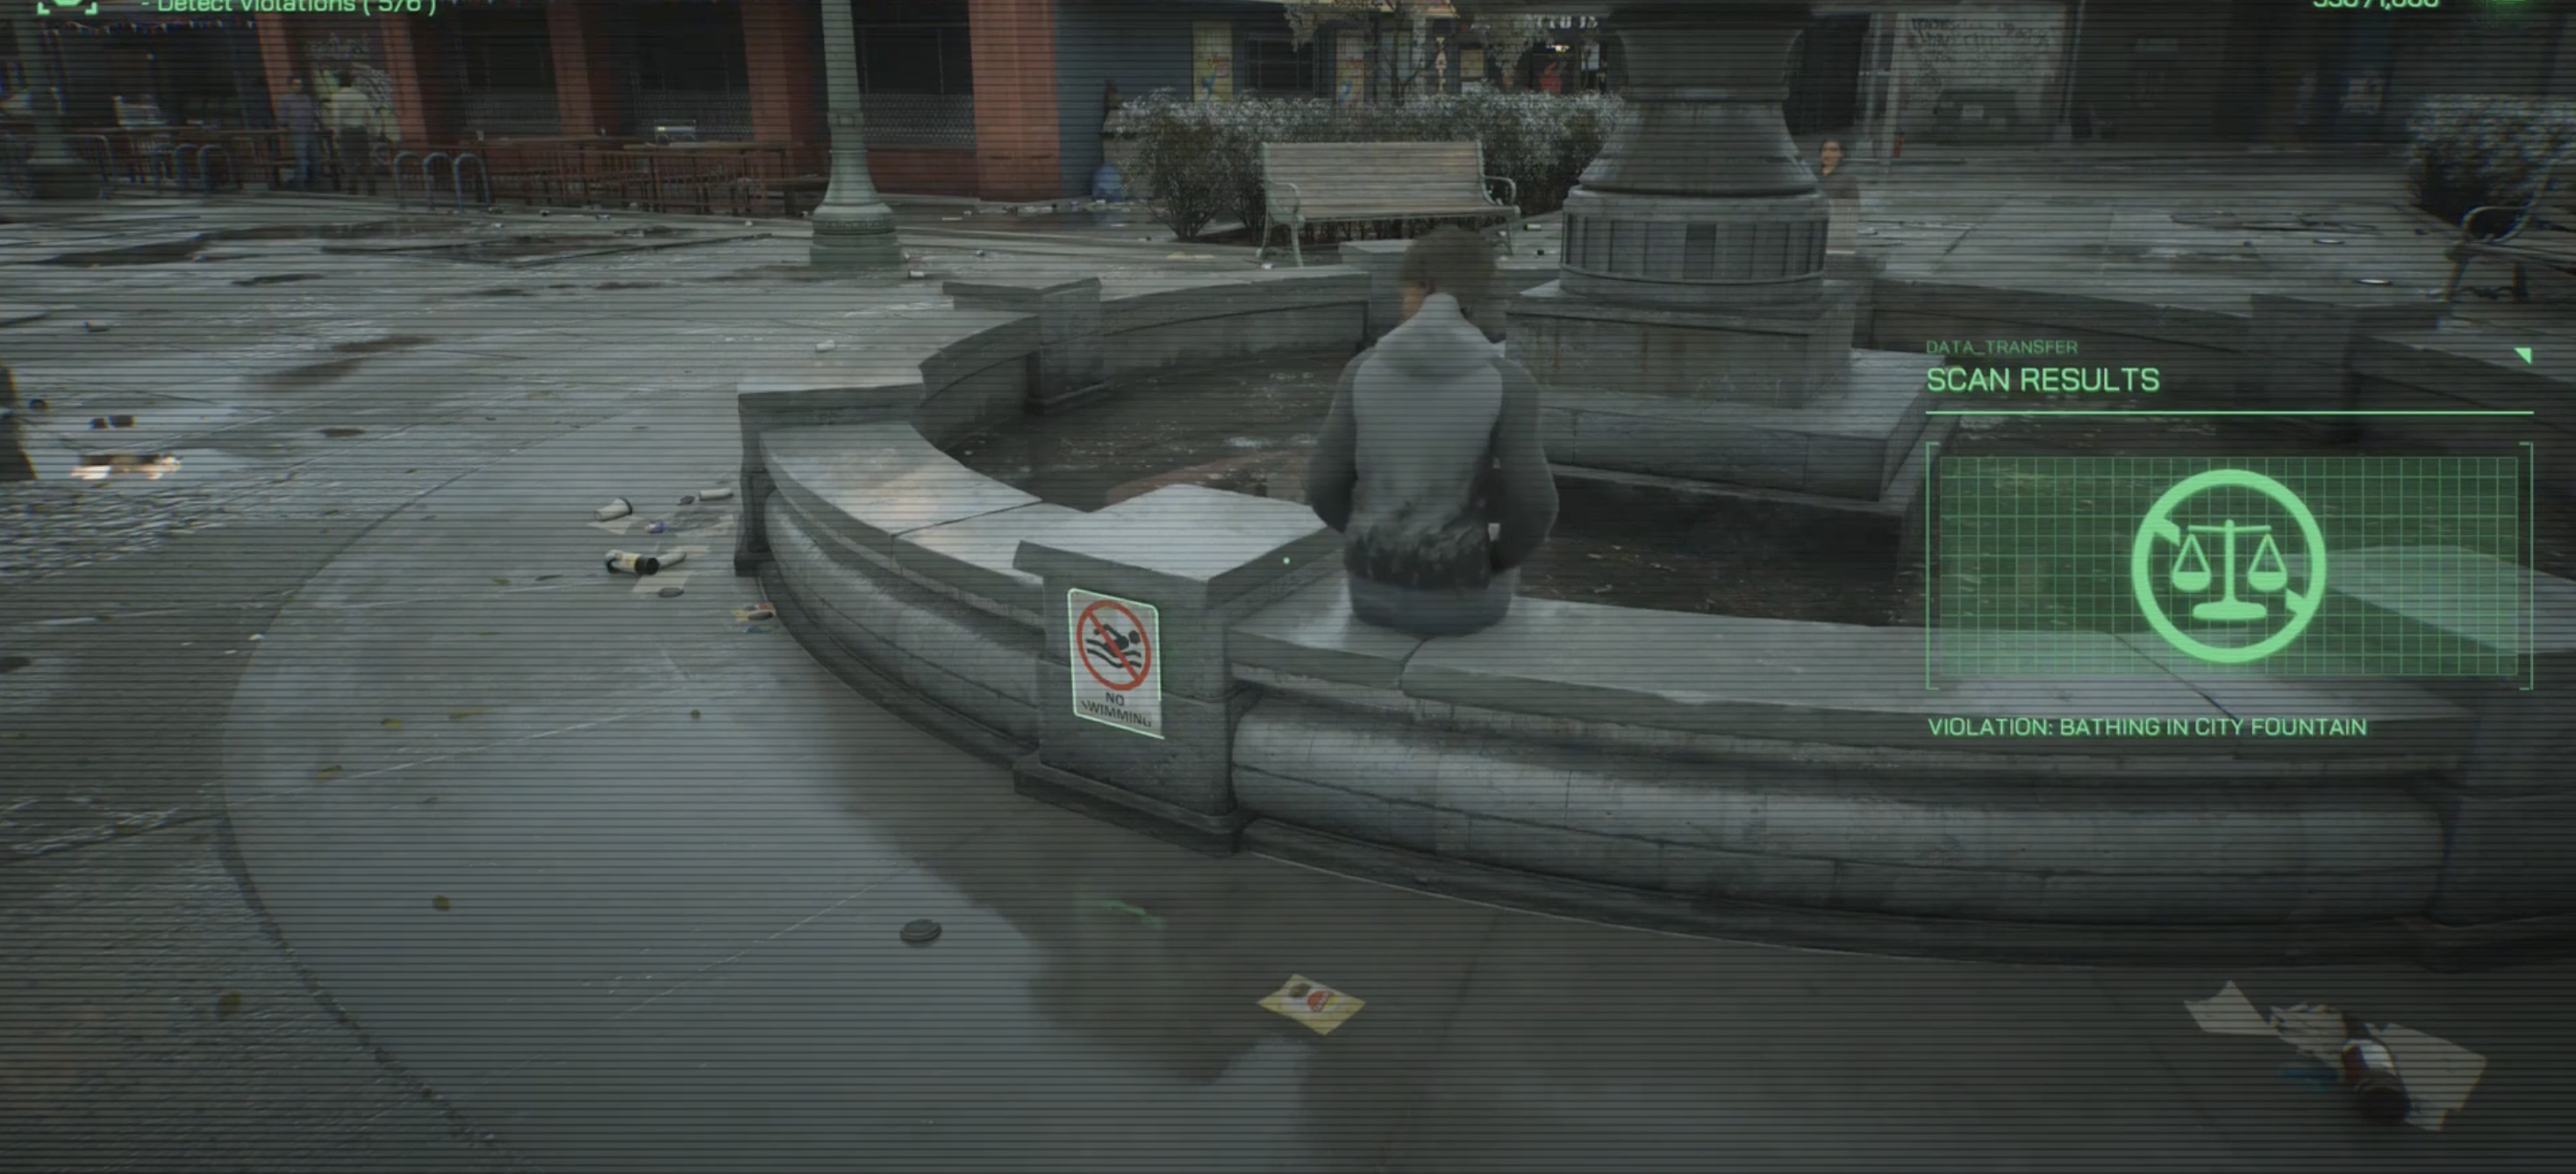 Violating the no swimming rule in the fountain for Violations in robocop rogue city.